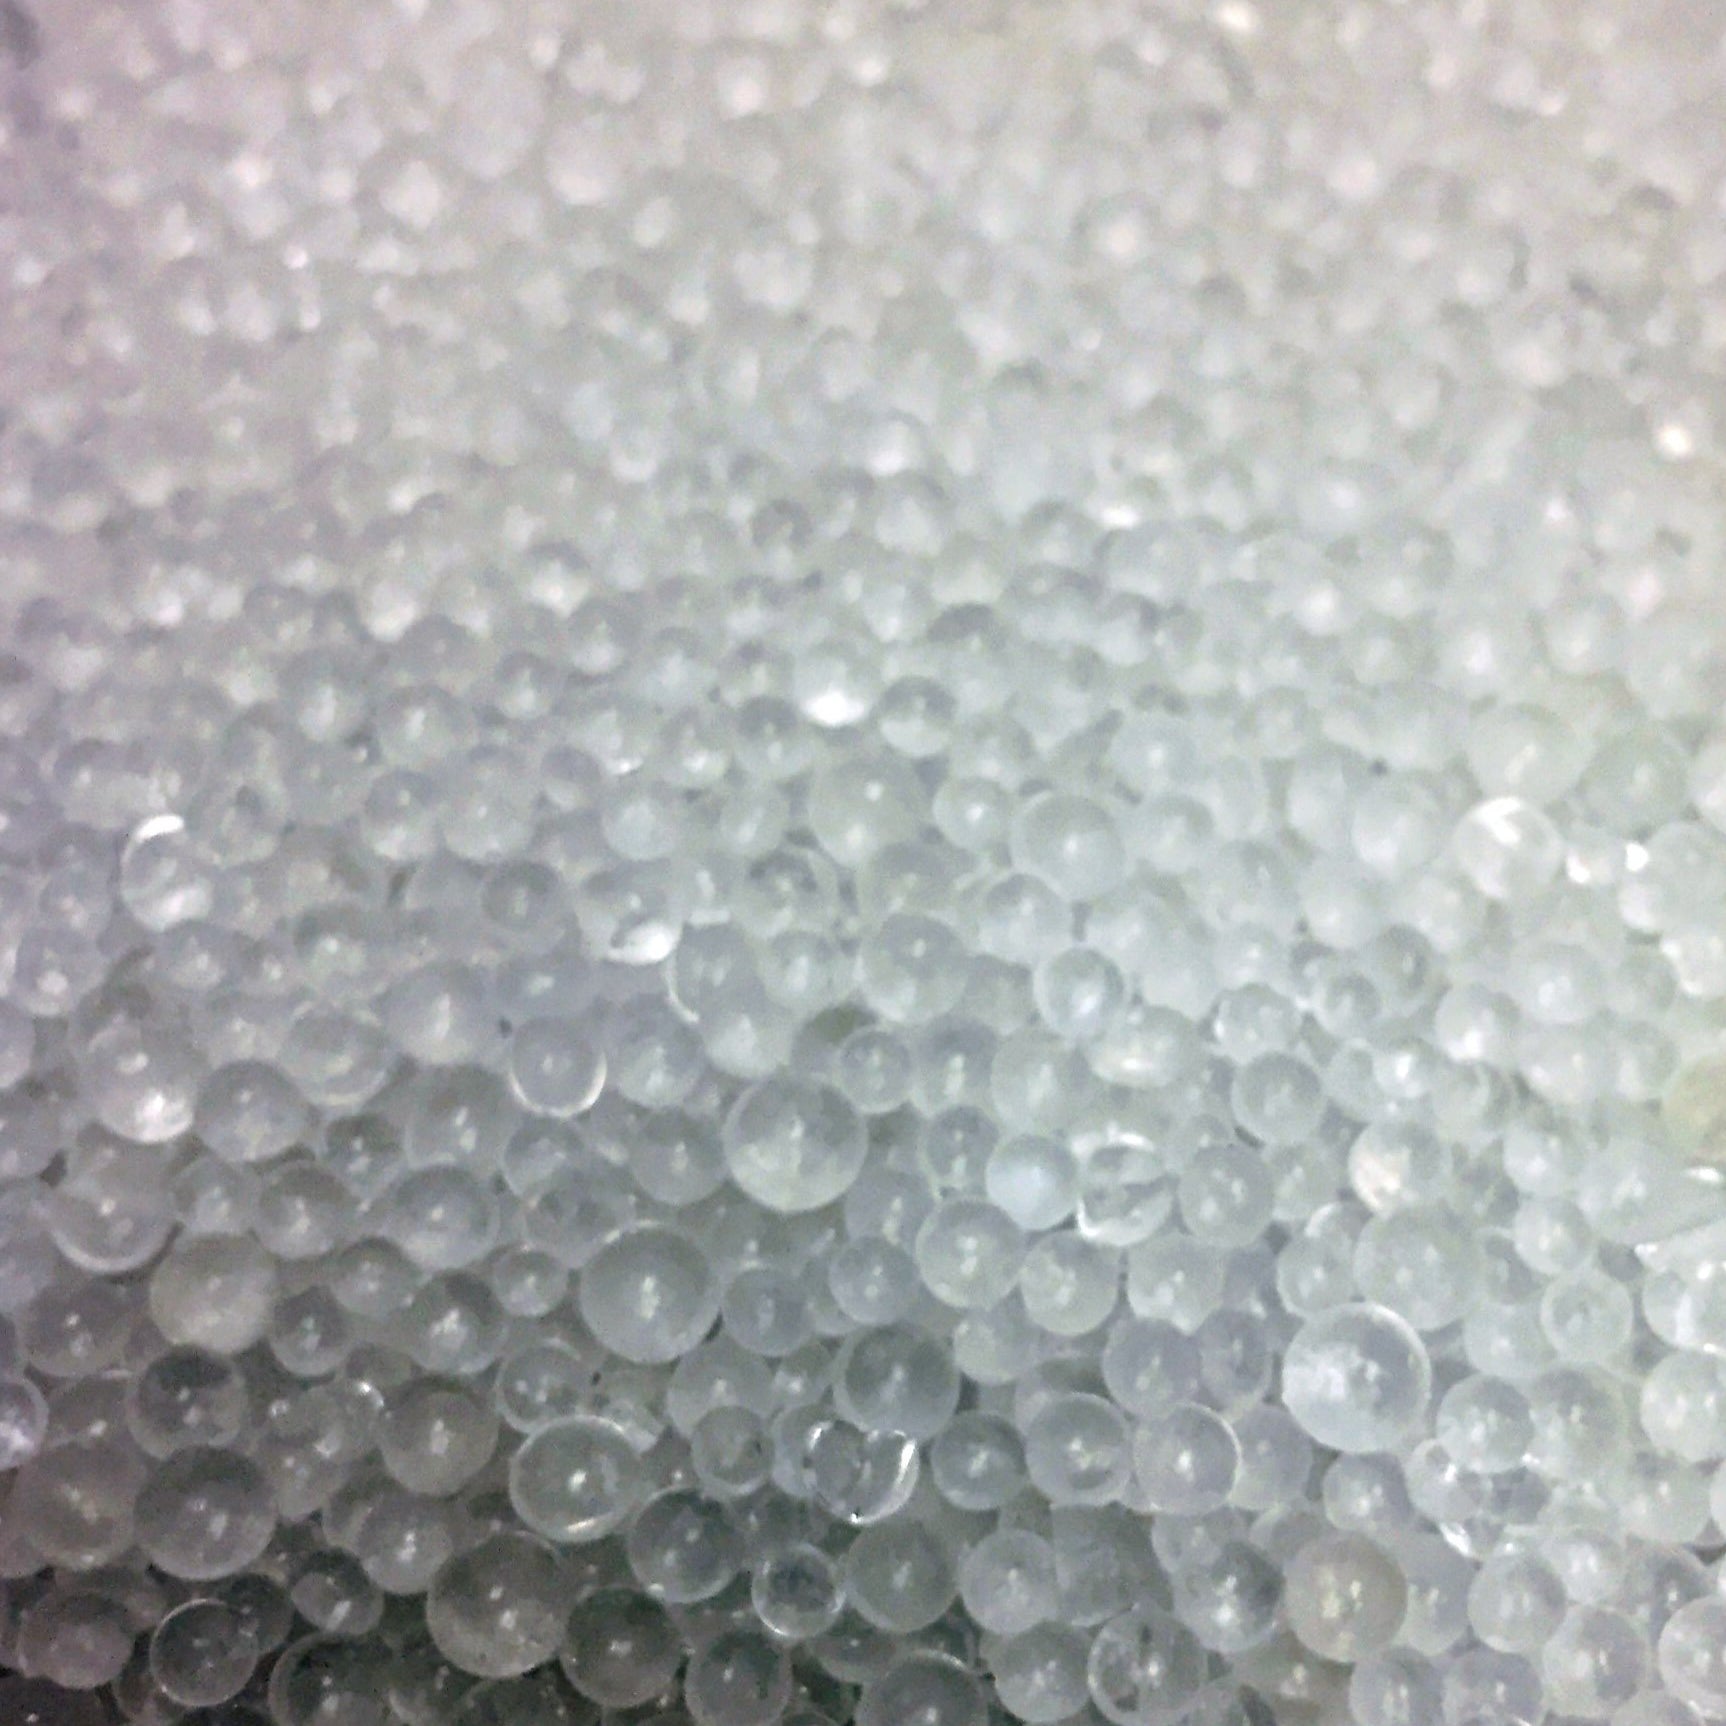 Making Use Of Industrial Grade Silica Gel Beads And Crystal For